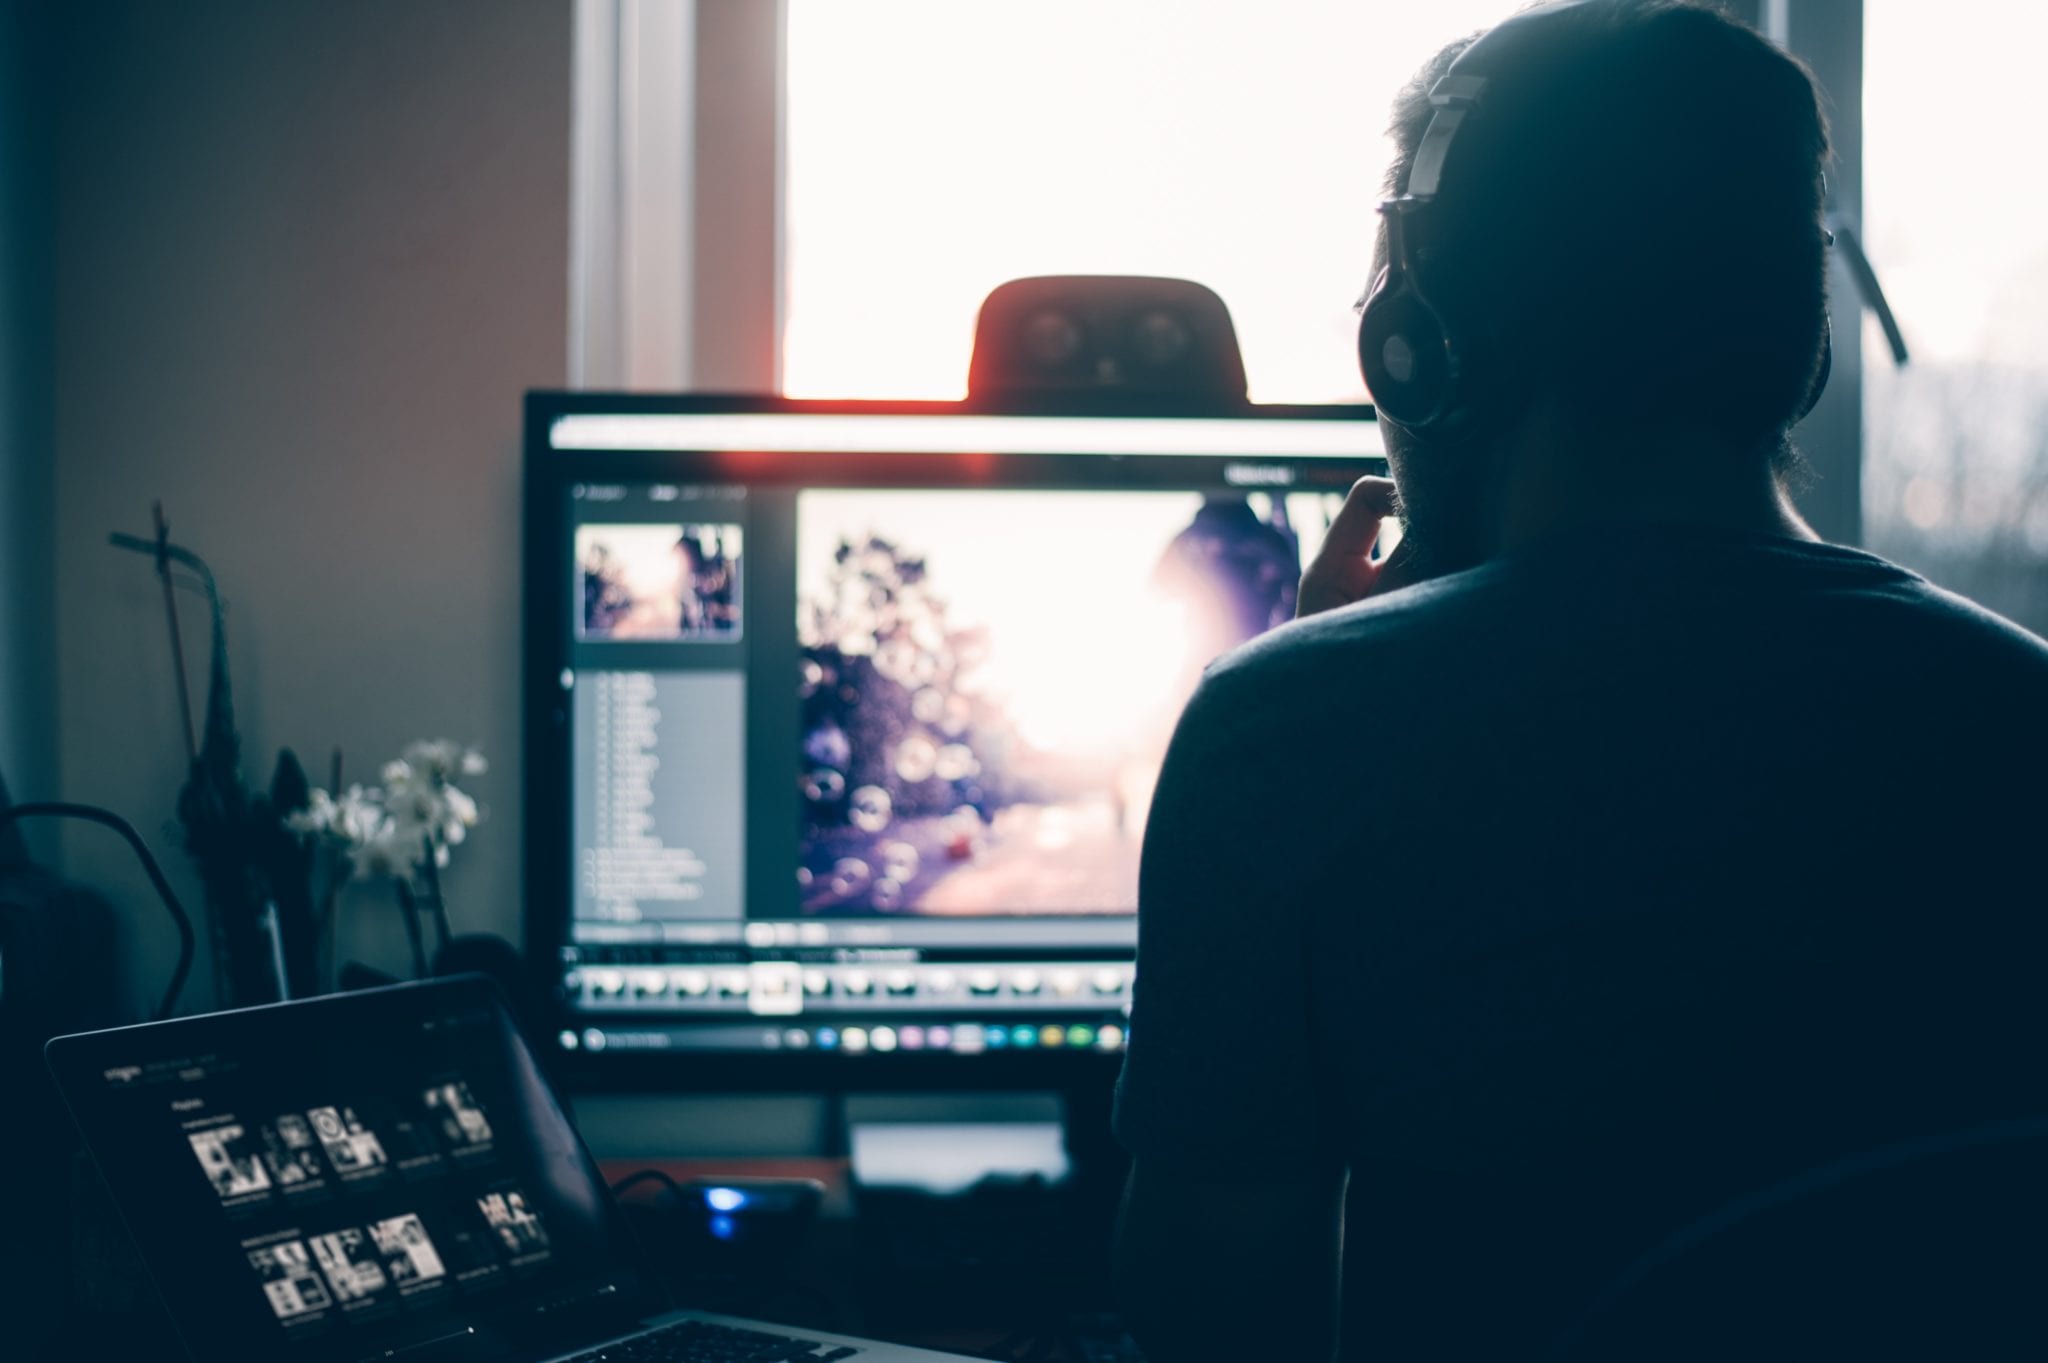 How to Step Up Your Video Marketing Game by Outsourcing Video Editing